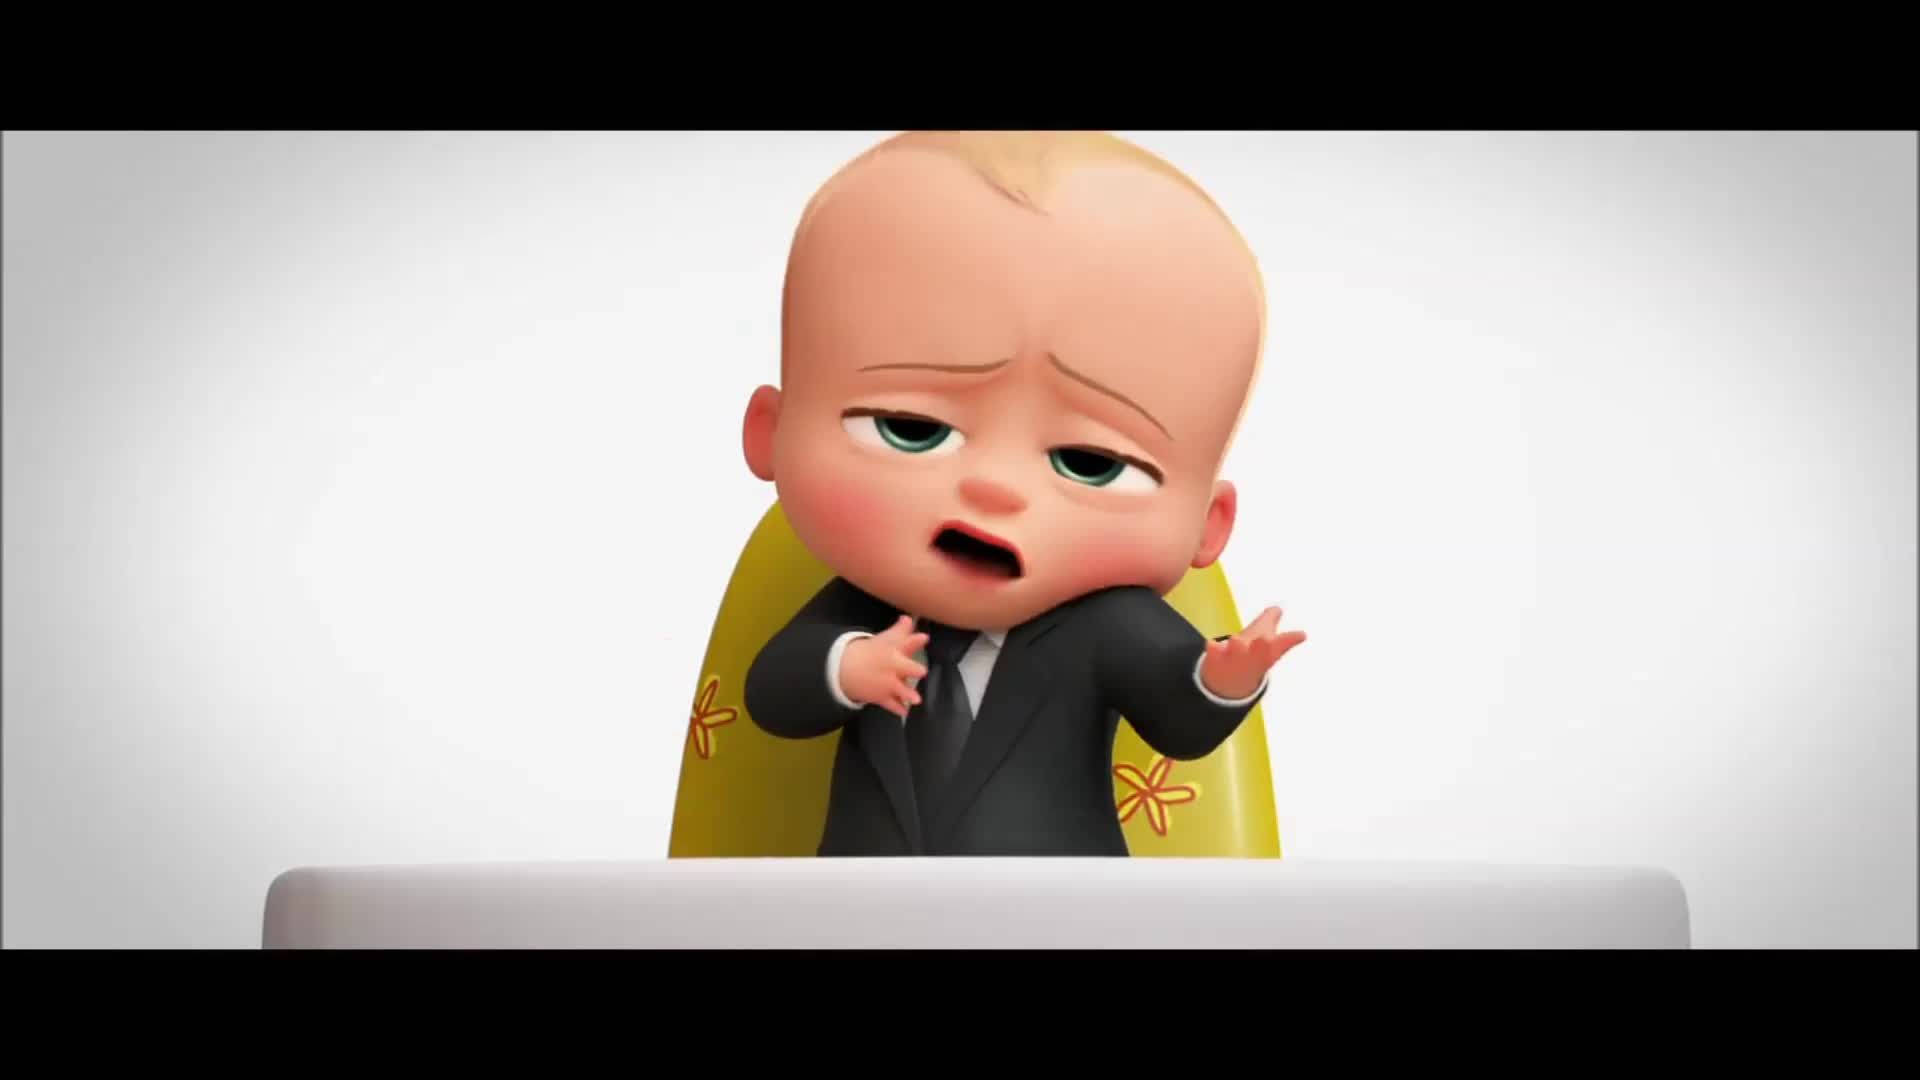 Download The Boss Baby Comedy Movie Wallpaper 